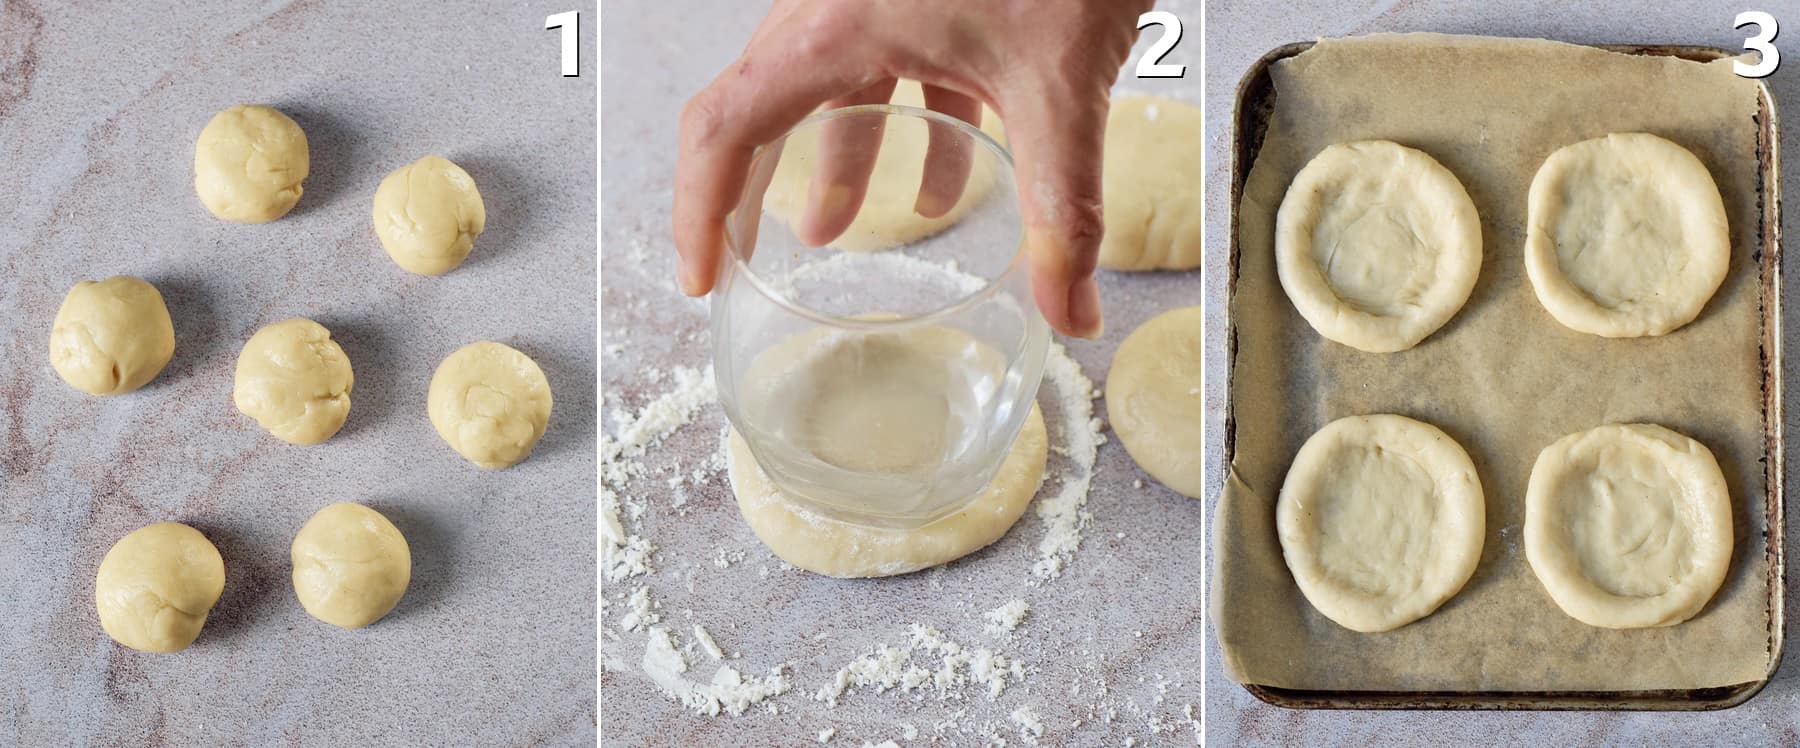 3 step-by-step photos of how to shape sweet yeast dough into kolache